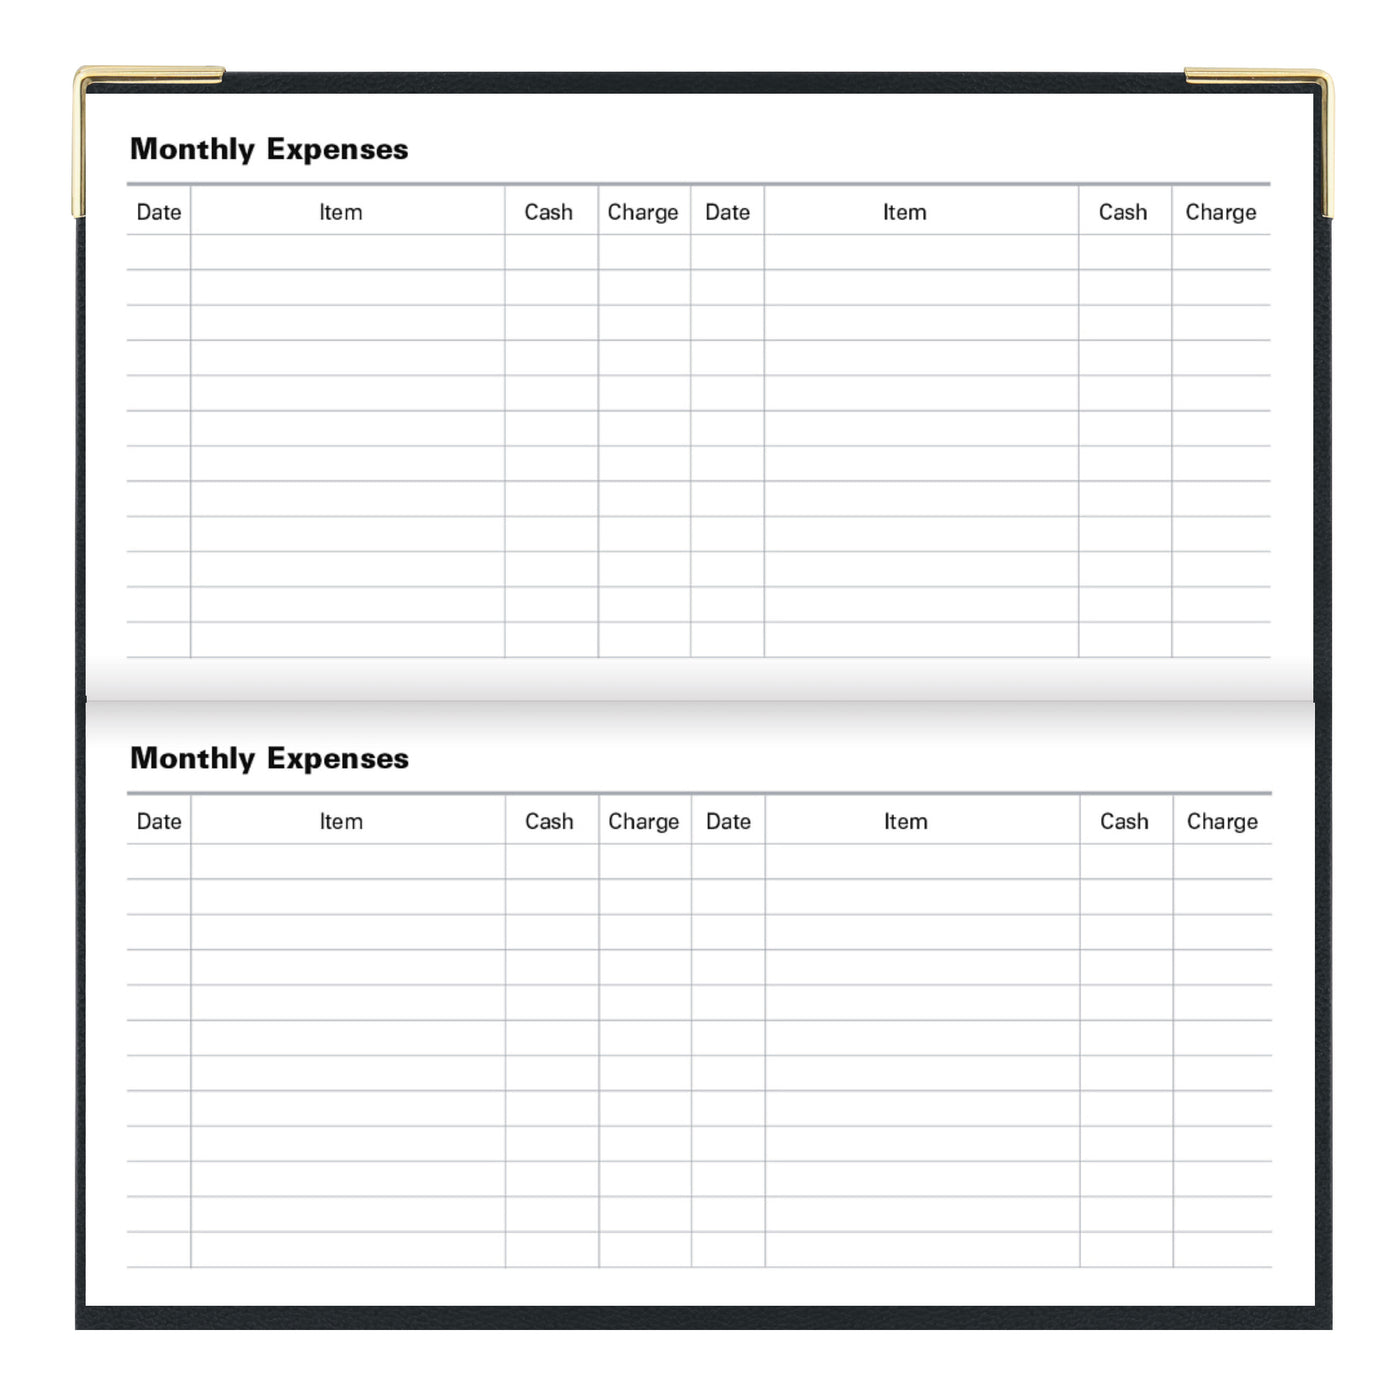 Letts Classic Week to View Horizontal Planner - 6 5/8" x 3 1/4" - Black